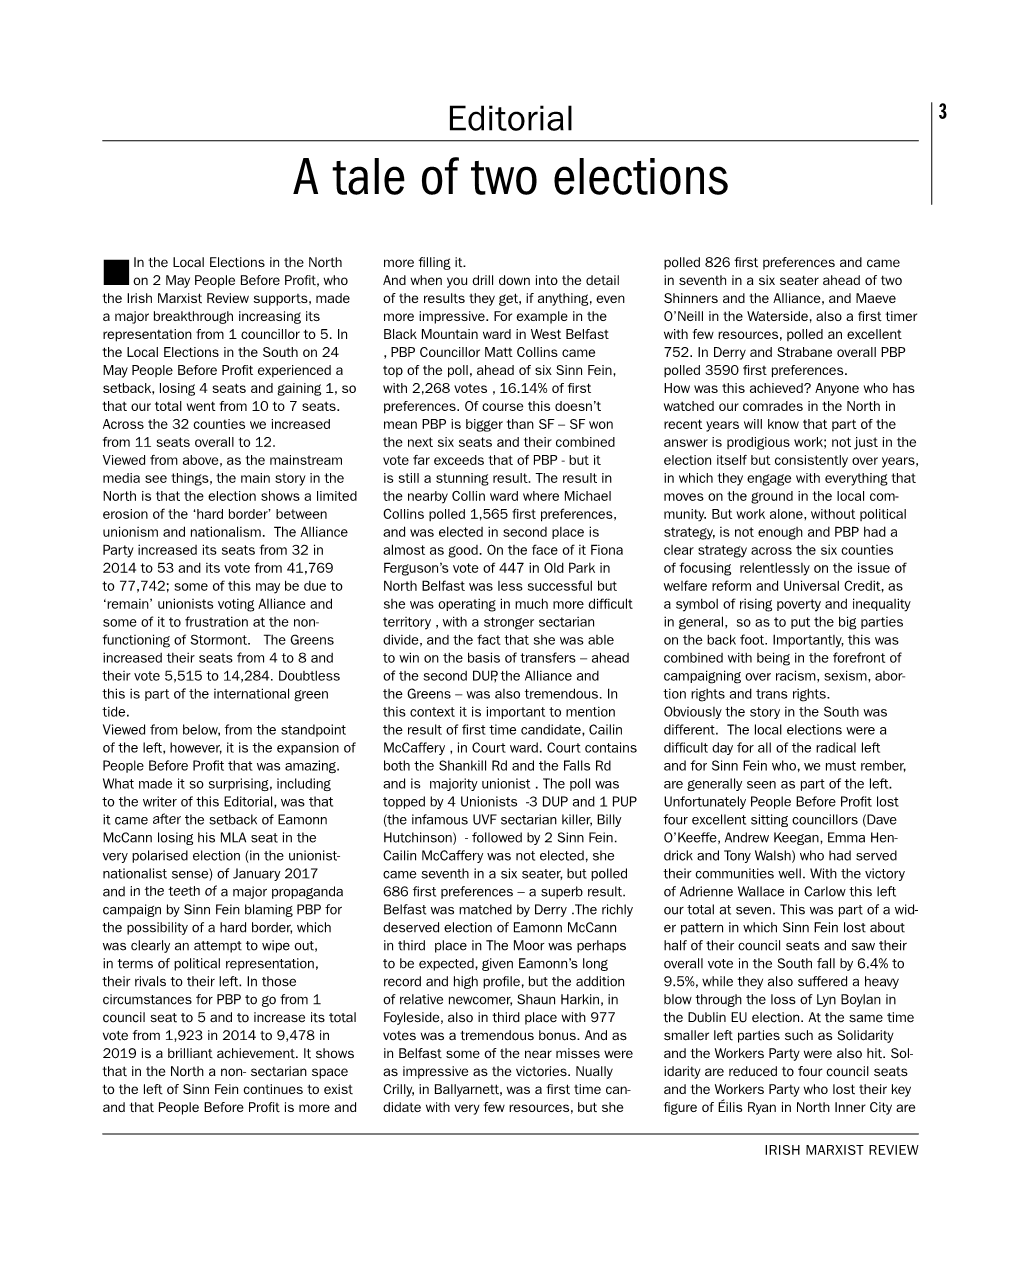 A Tale of Two Elections